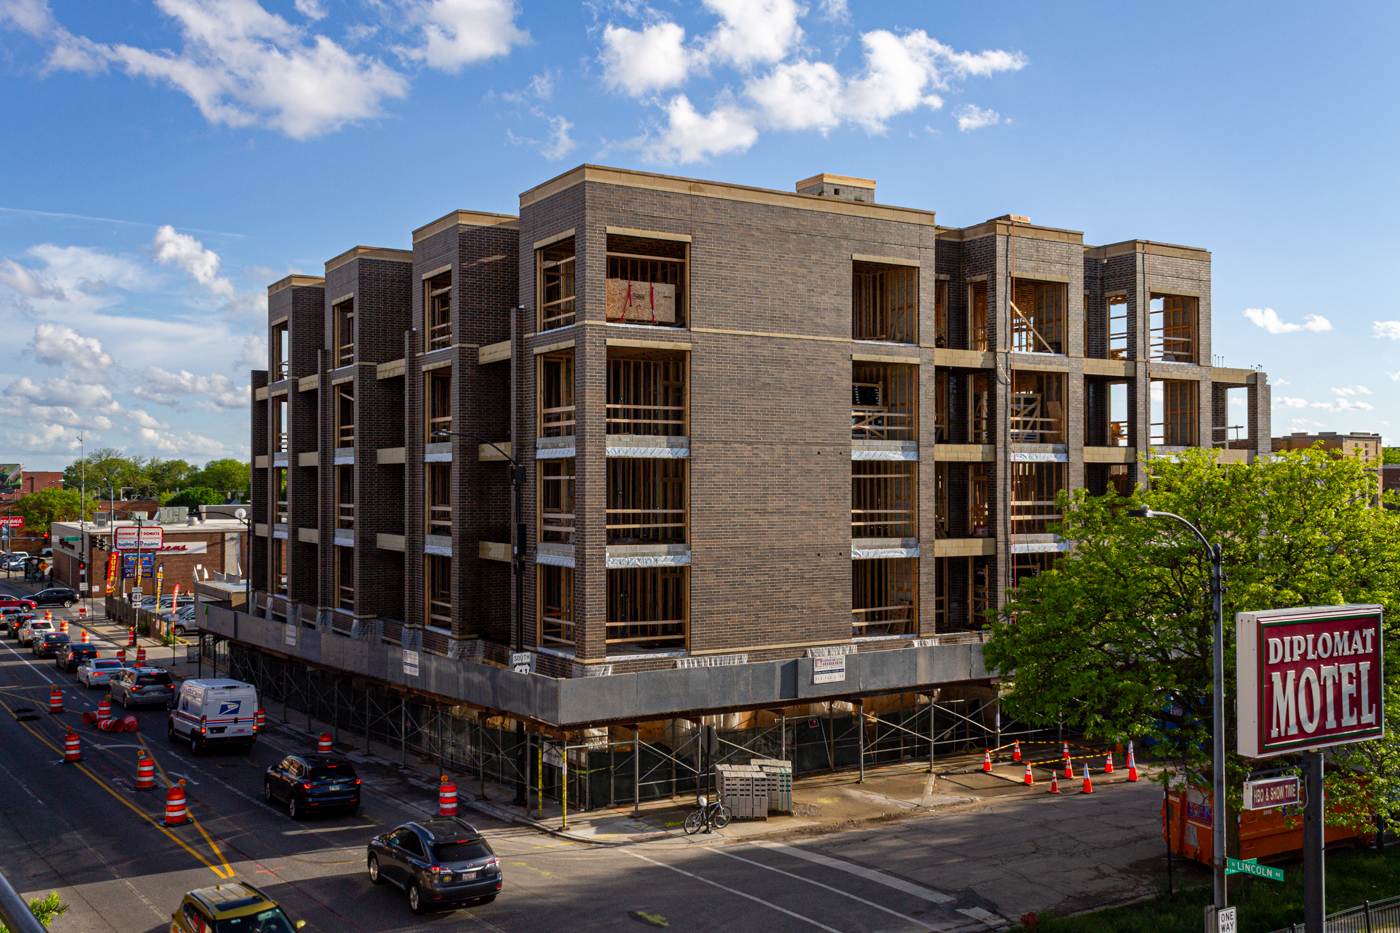 2505 West Farragut (5216 North Lincoln) construction in Lincoln Square